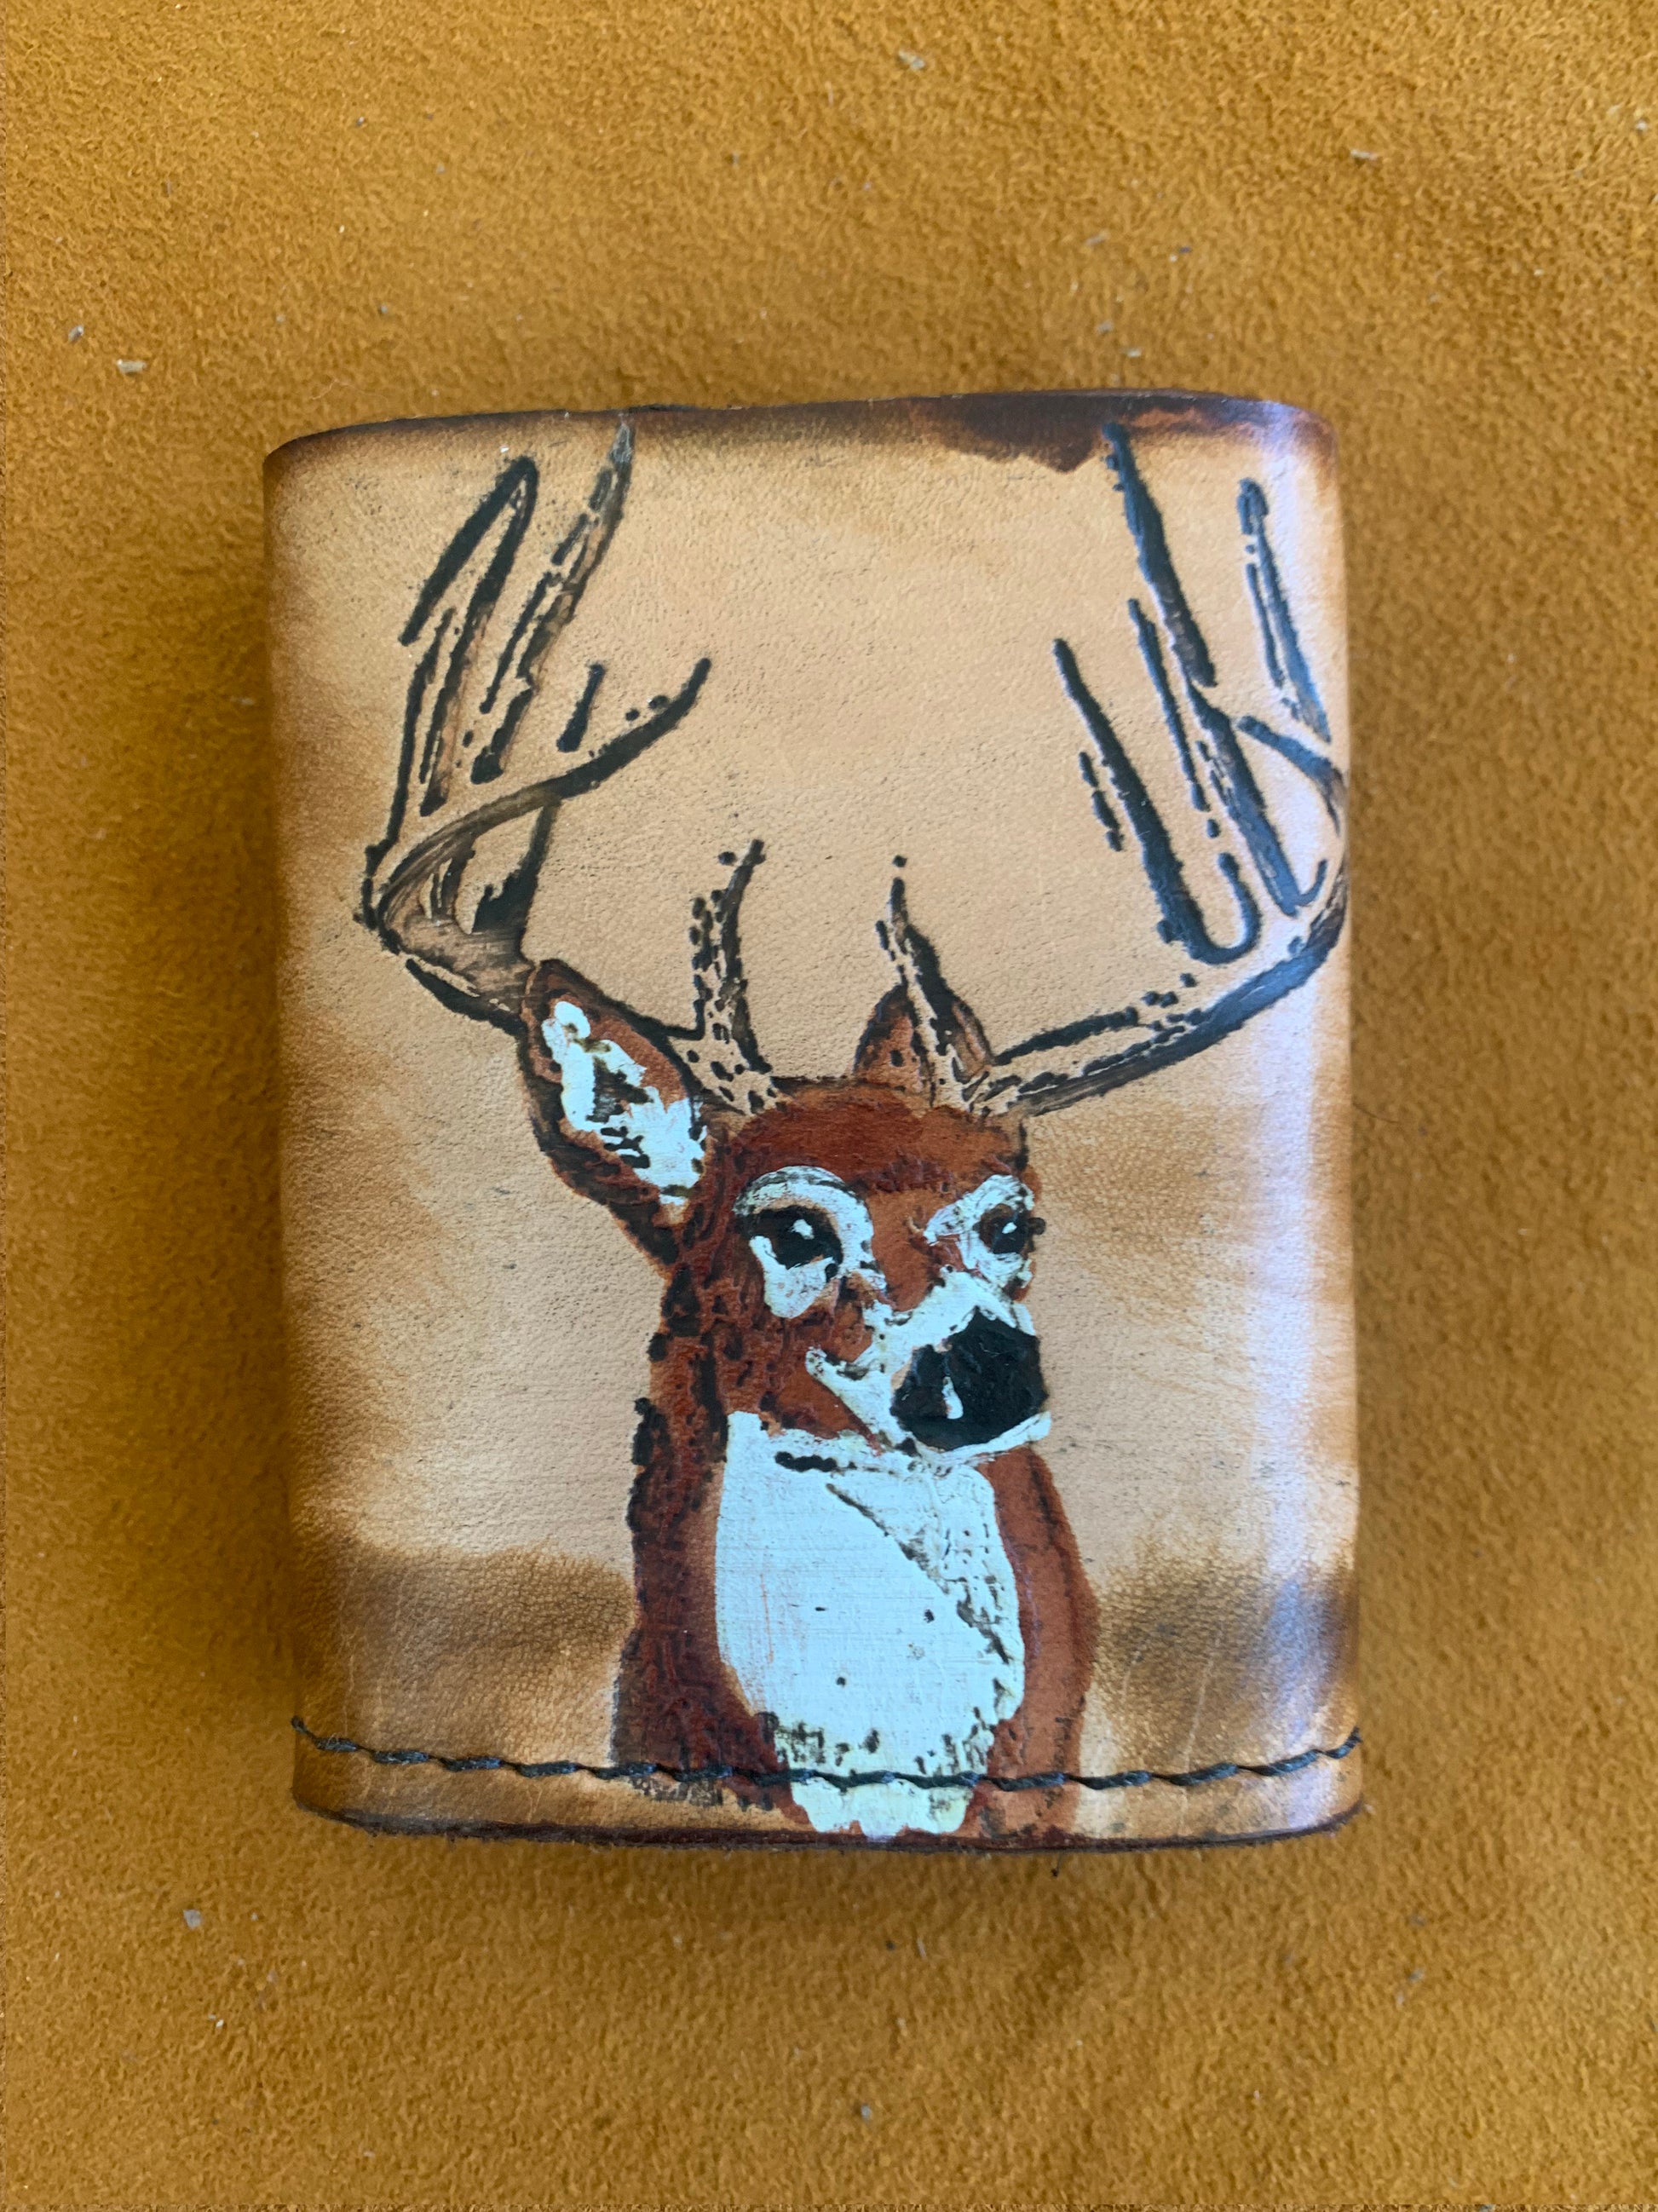 Animals of The Catskills L-Fold Leather Wallet - Custom Handmade Leather Wallet Deer